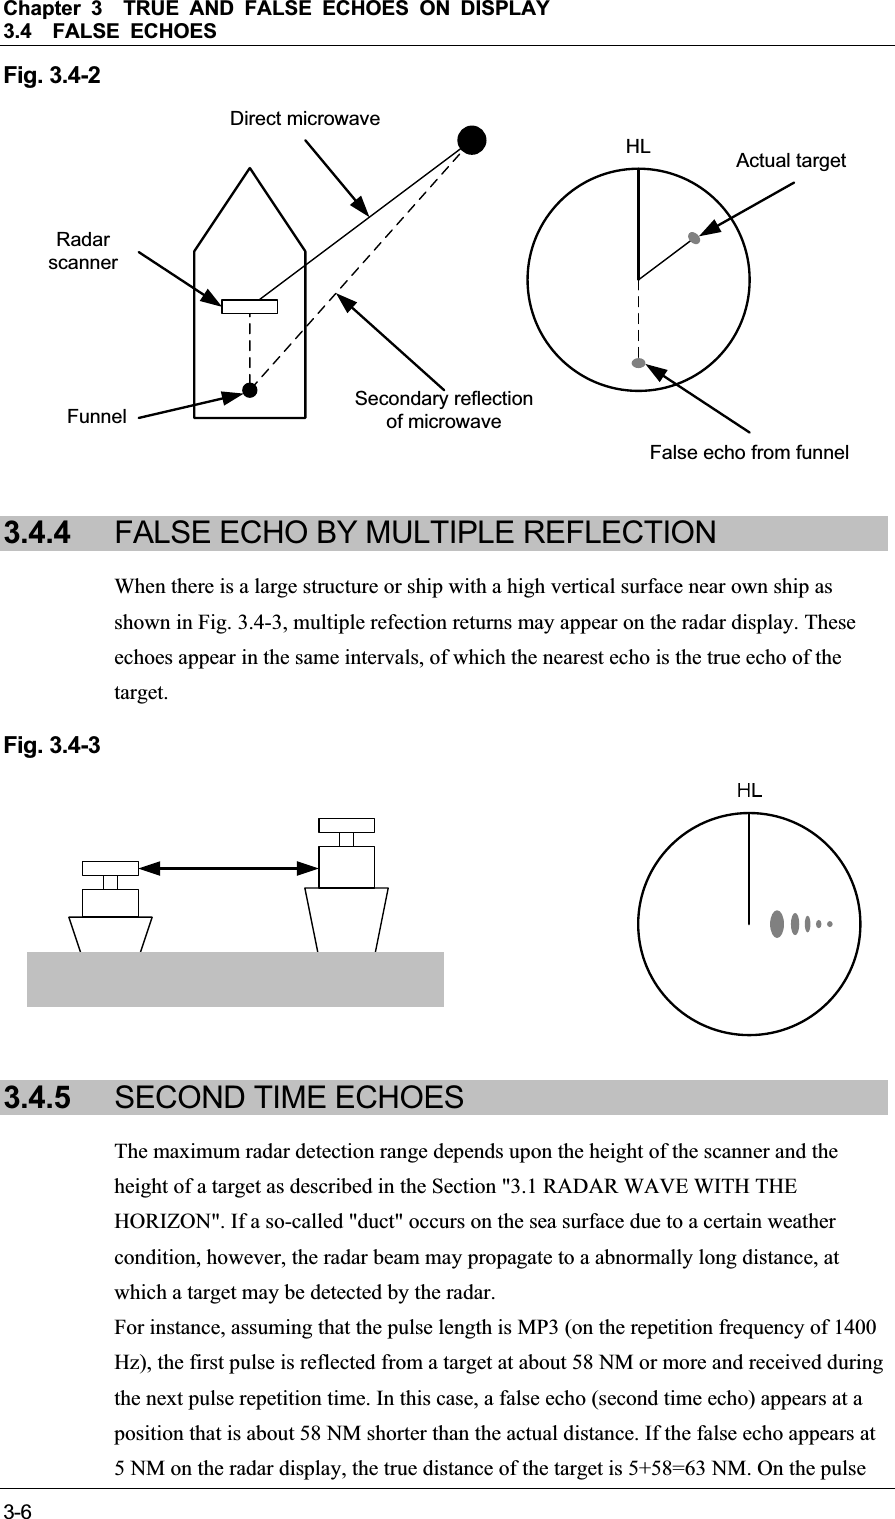 Chapter 3TRUE AND FALSE ECHOES ON DISPLAY 3.4FALSE ECHOES 3-6Fig. 3.4-2     Radar scannerFunnelHLDirect microwaveSecondary reflectionof microwaveActual targetFalse echo from funnel 3.4.4 FALSE ECHO BY MULTIPLE REFLECTION When there is a large structure or ship with a high vertical surface near own ship as shown in Fig. 3.4-3, multiple refection returns may appear on the radar display. These echoes appear in the same intervals, of which the nearest echo is the true echo of the target.Fig. 3.4-3     3.4.5 SECOND TIME ECHOES The maximum radar detection range depends upon the height of the scanner and the height of a target as described in the Section &quot;3.1 RADAR WAVE WITH THE HORIZON&quot;. If a so-called &quot;duct&quot; occurs on the sea surface due to a certain weather condition, however, the radar beam may propagate to a abnormally long distance, at which a target may be detected by the radar. For instance, assuming that the pulse length is MP3 (on the repetition frequency of 1400 Hz), the first pulse is reflected from a target at about 58 NM or more and received during the next pulse repetition time. In this case, a false echo (second time echo) appears at a position that is about 58 NM shorter than the actual distance. If the false echo appears at 5 NM on the radar display, the true distance of the target is 5+58=63 NM. On the pulse 